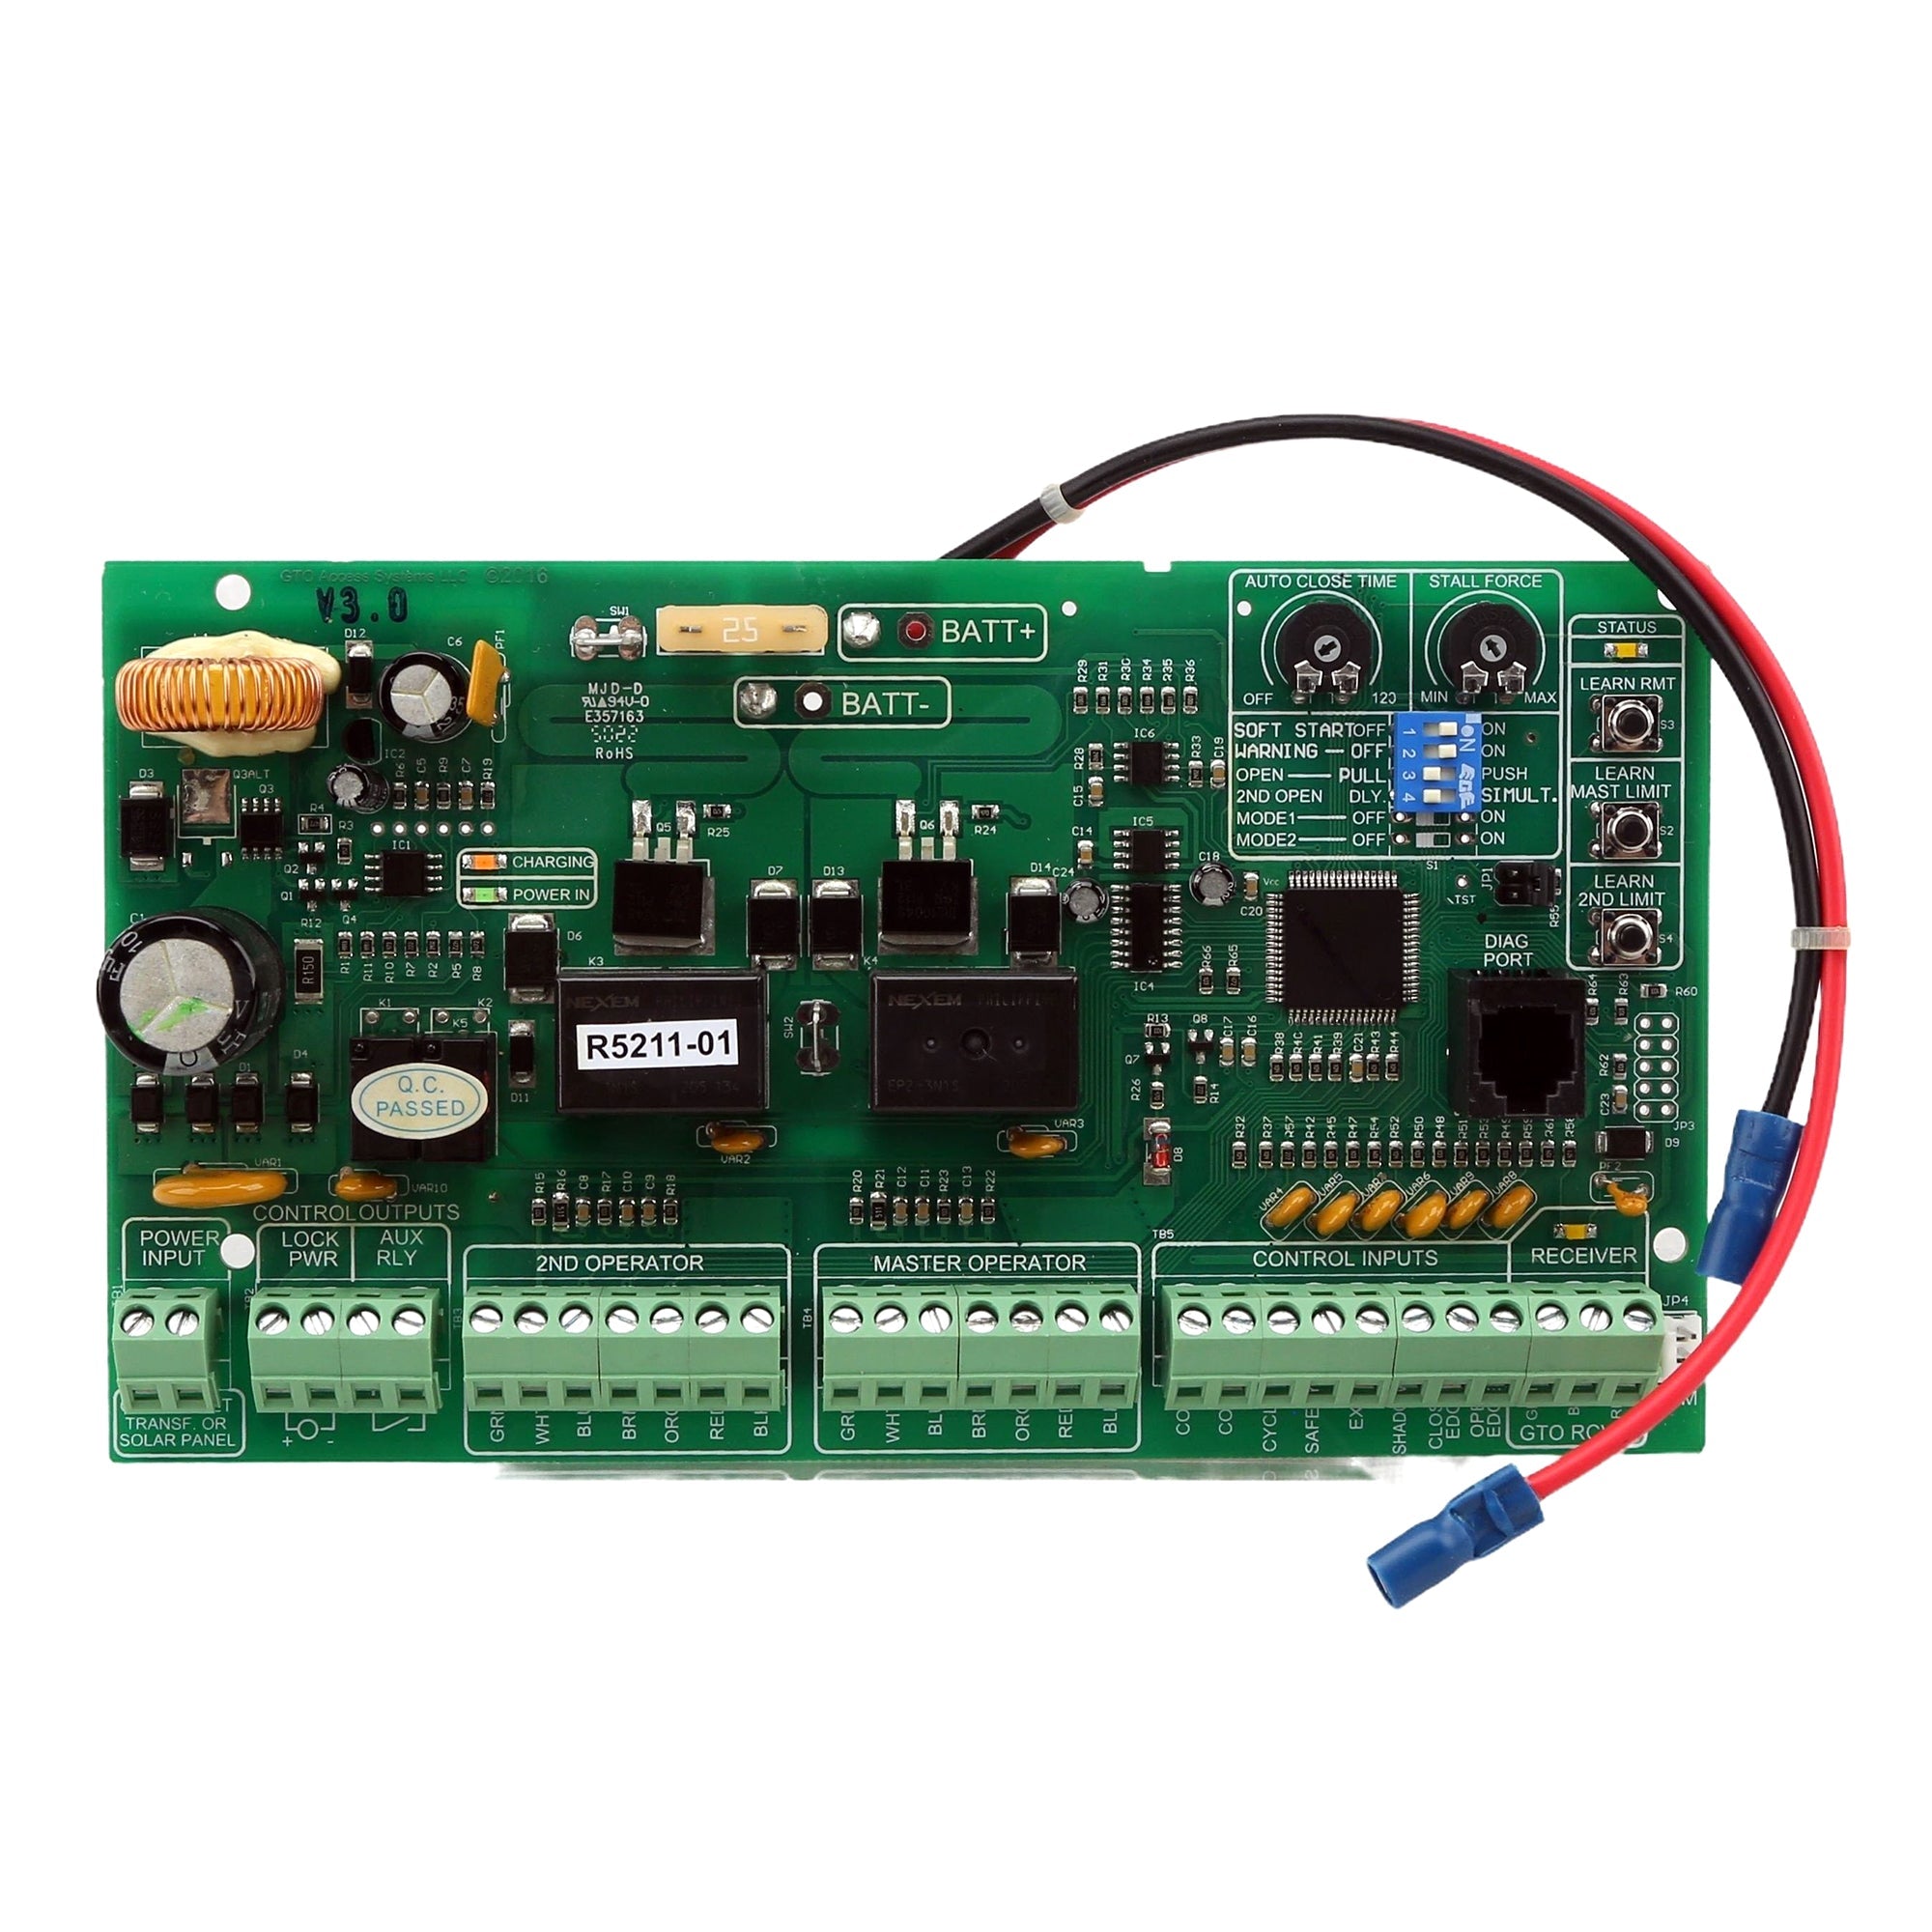 Replacement Control Board for SL2000 Series (R5211-01) | Mighty Mule Automatic Gate Openers